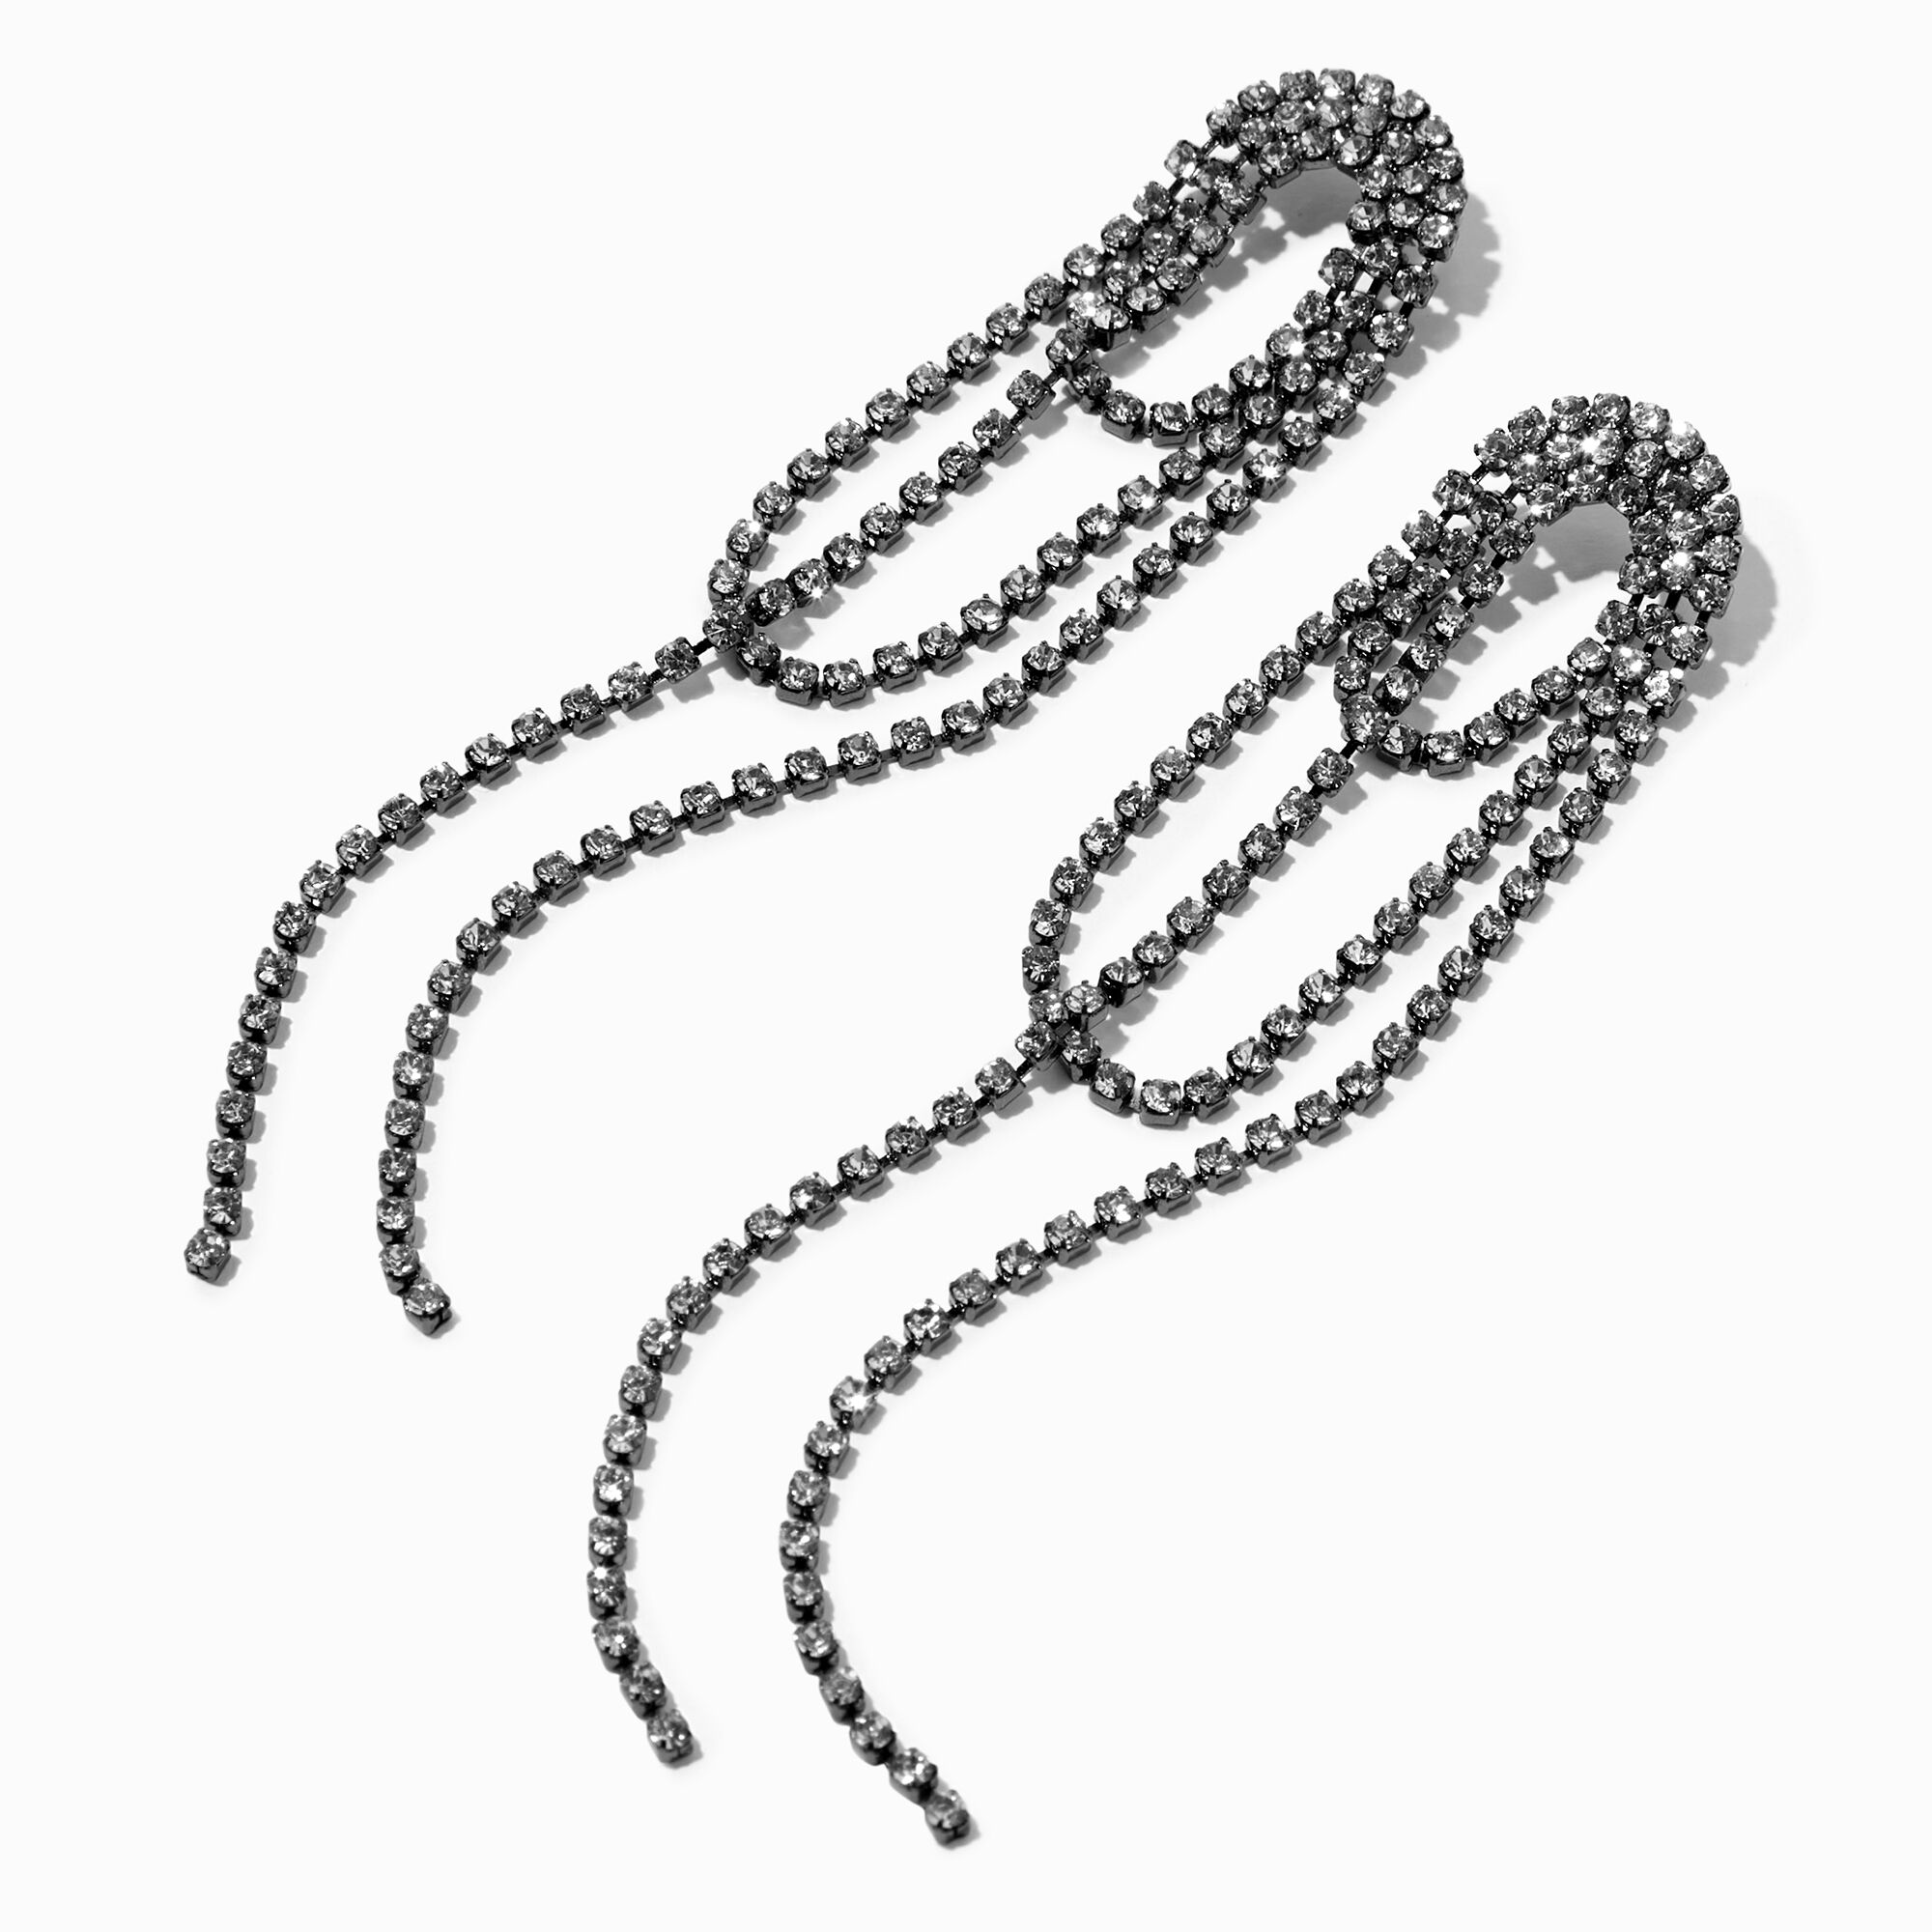 View Claires Hematite Crystal Loopy Lasso 4 Drop Earrings information